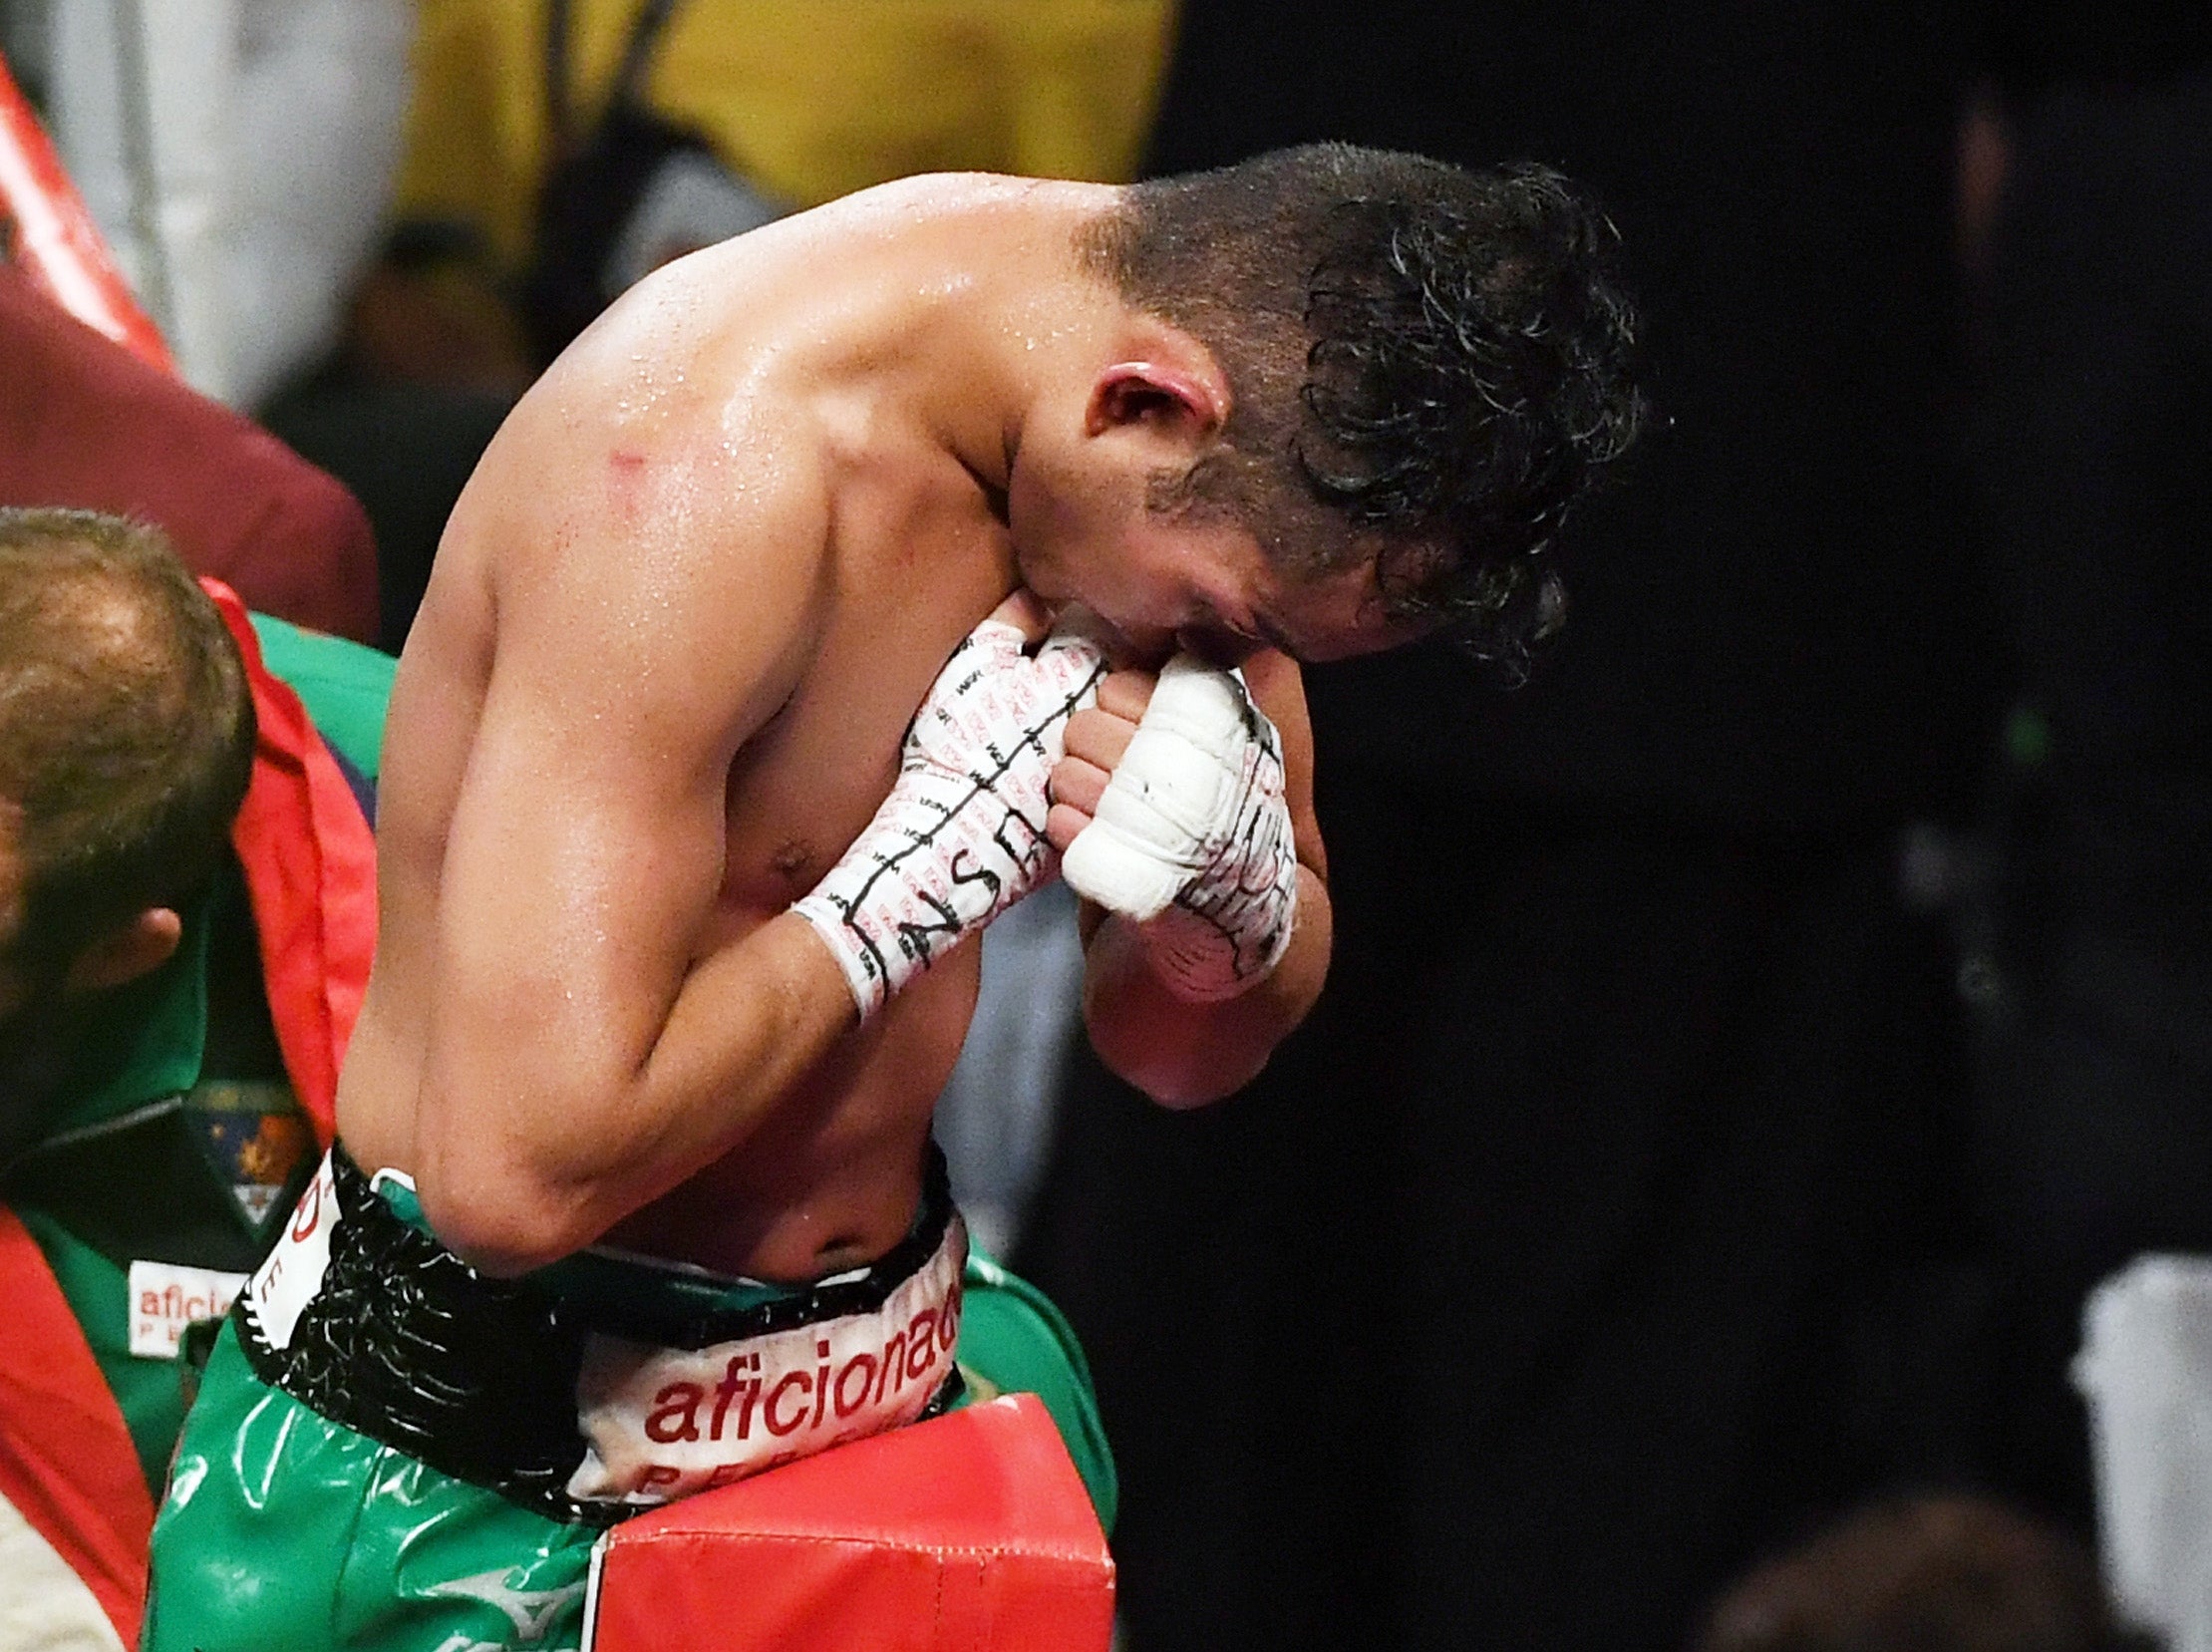 Donaire is 35 and edging towards the end of his career